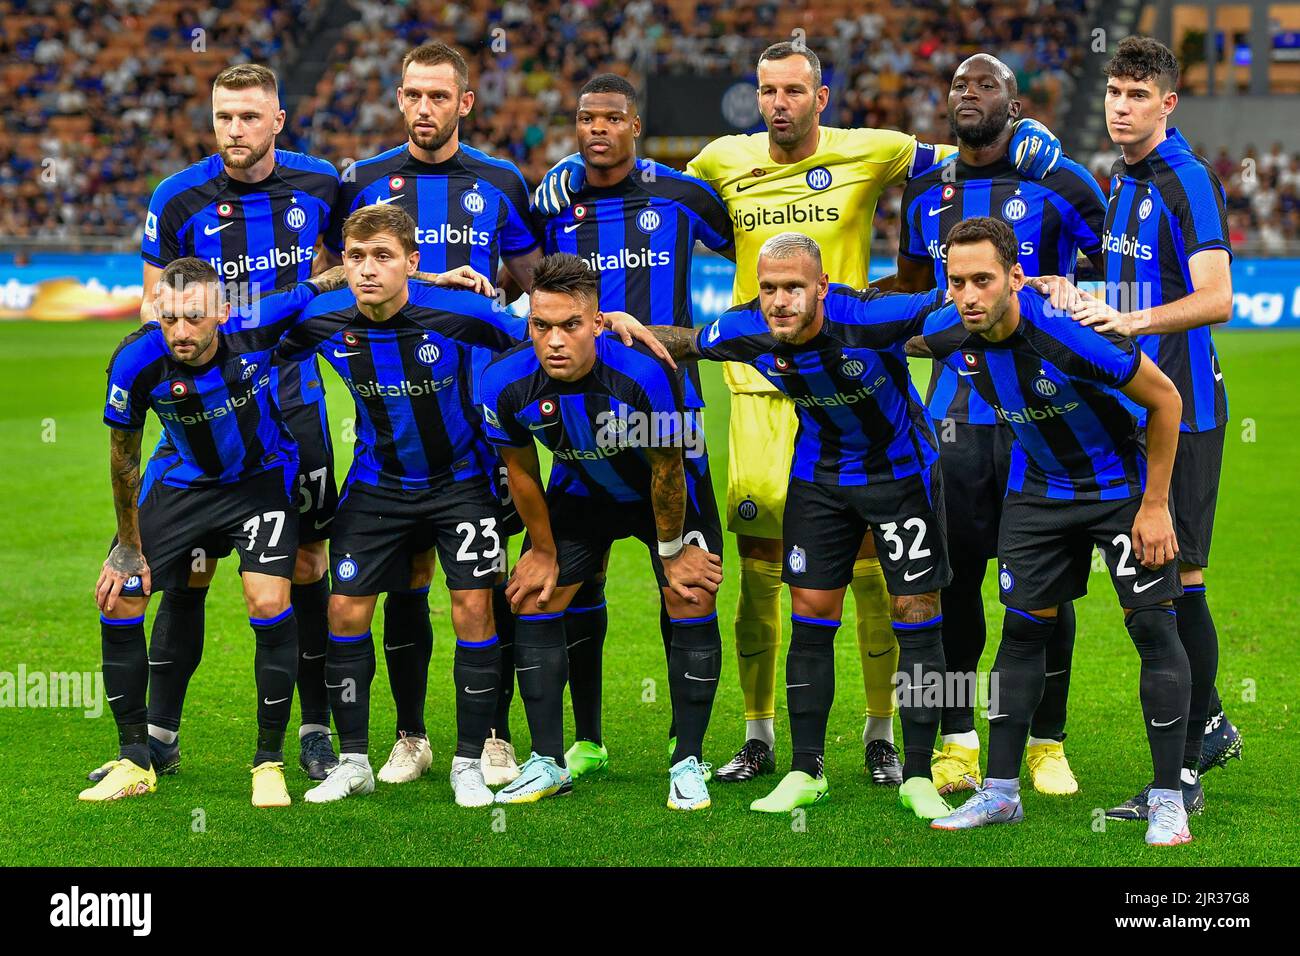 Milano, Italy. 20th, August 2022. The starting-11 of Inter for the Serie A match between Inter and Spezia at Giuseppe Meazza in Milano. (Photo credit: Gonzales Photo - Tommaso Fimiano). Stock Photo